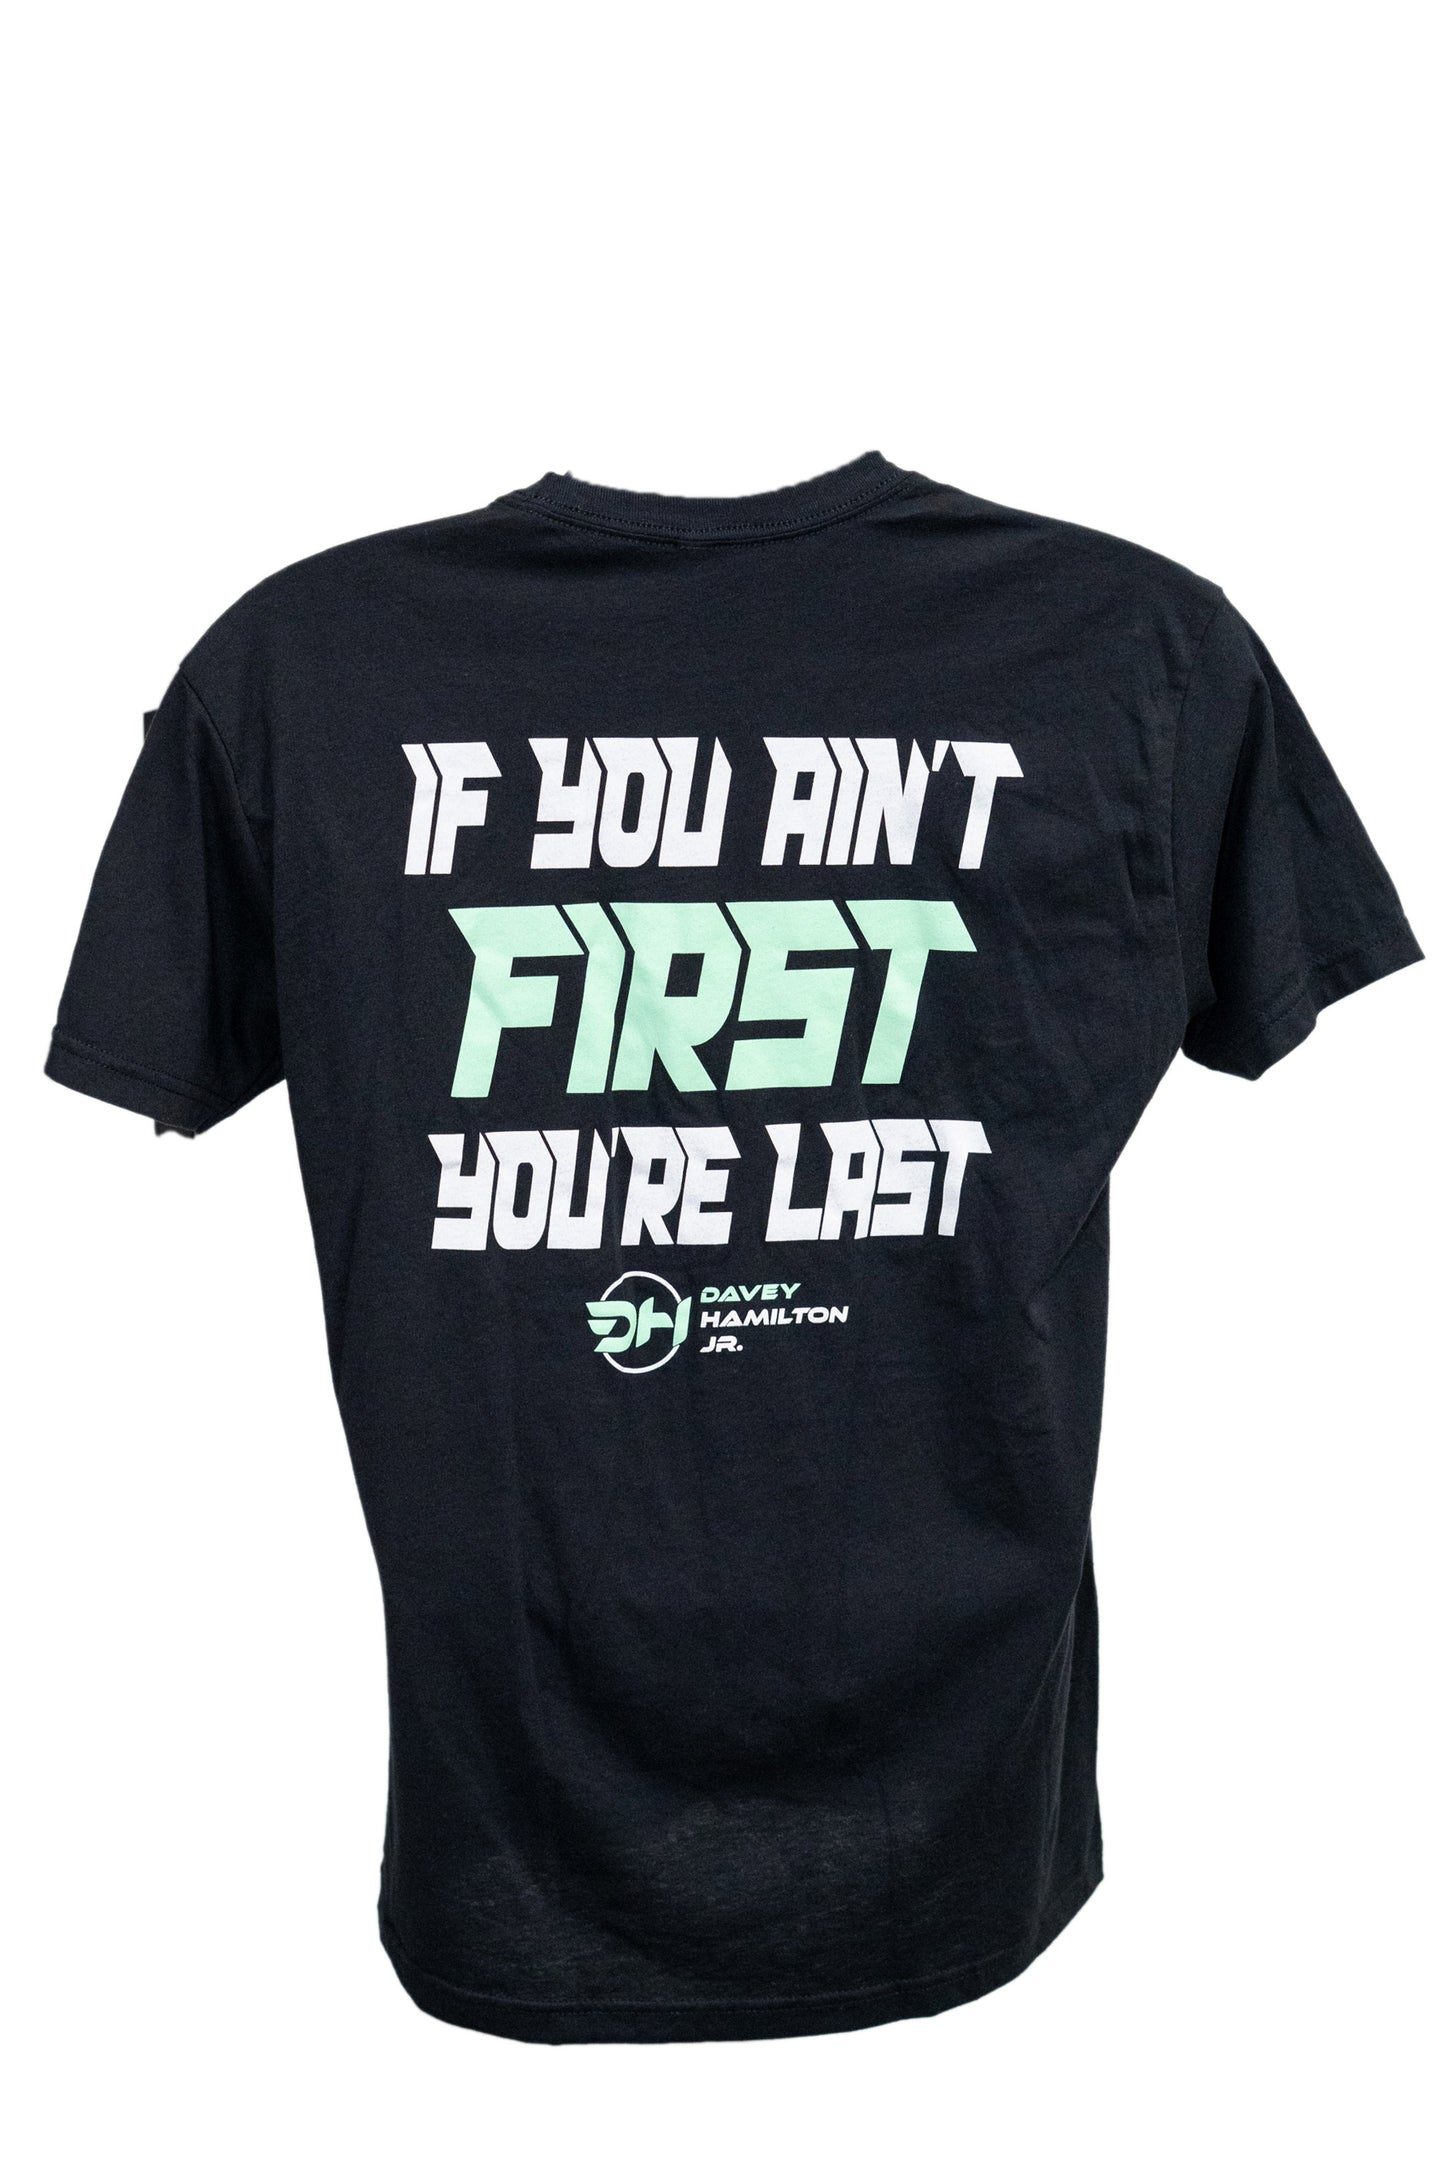 Hamilton Jr. #14 "If You Aint First You're Last" Short Sleeve T